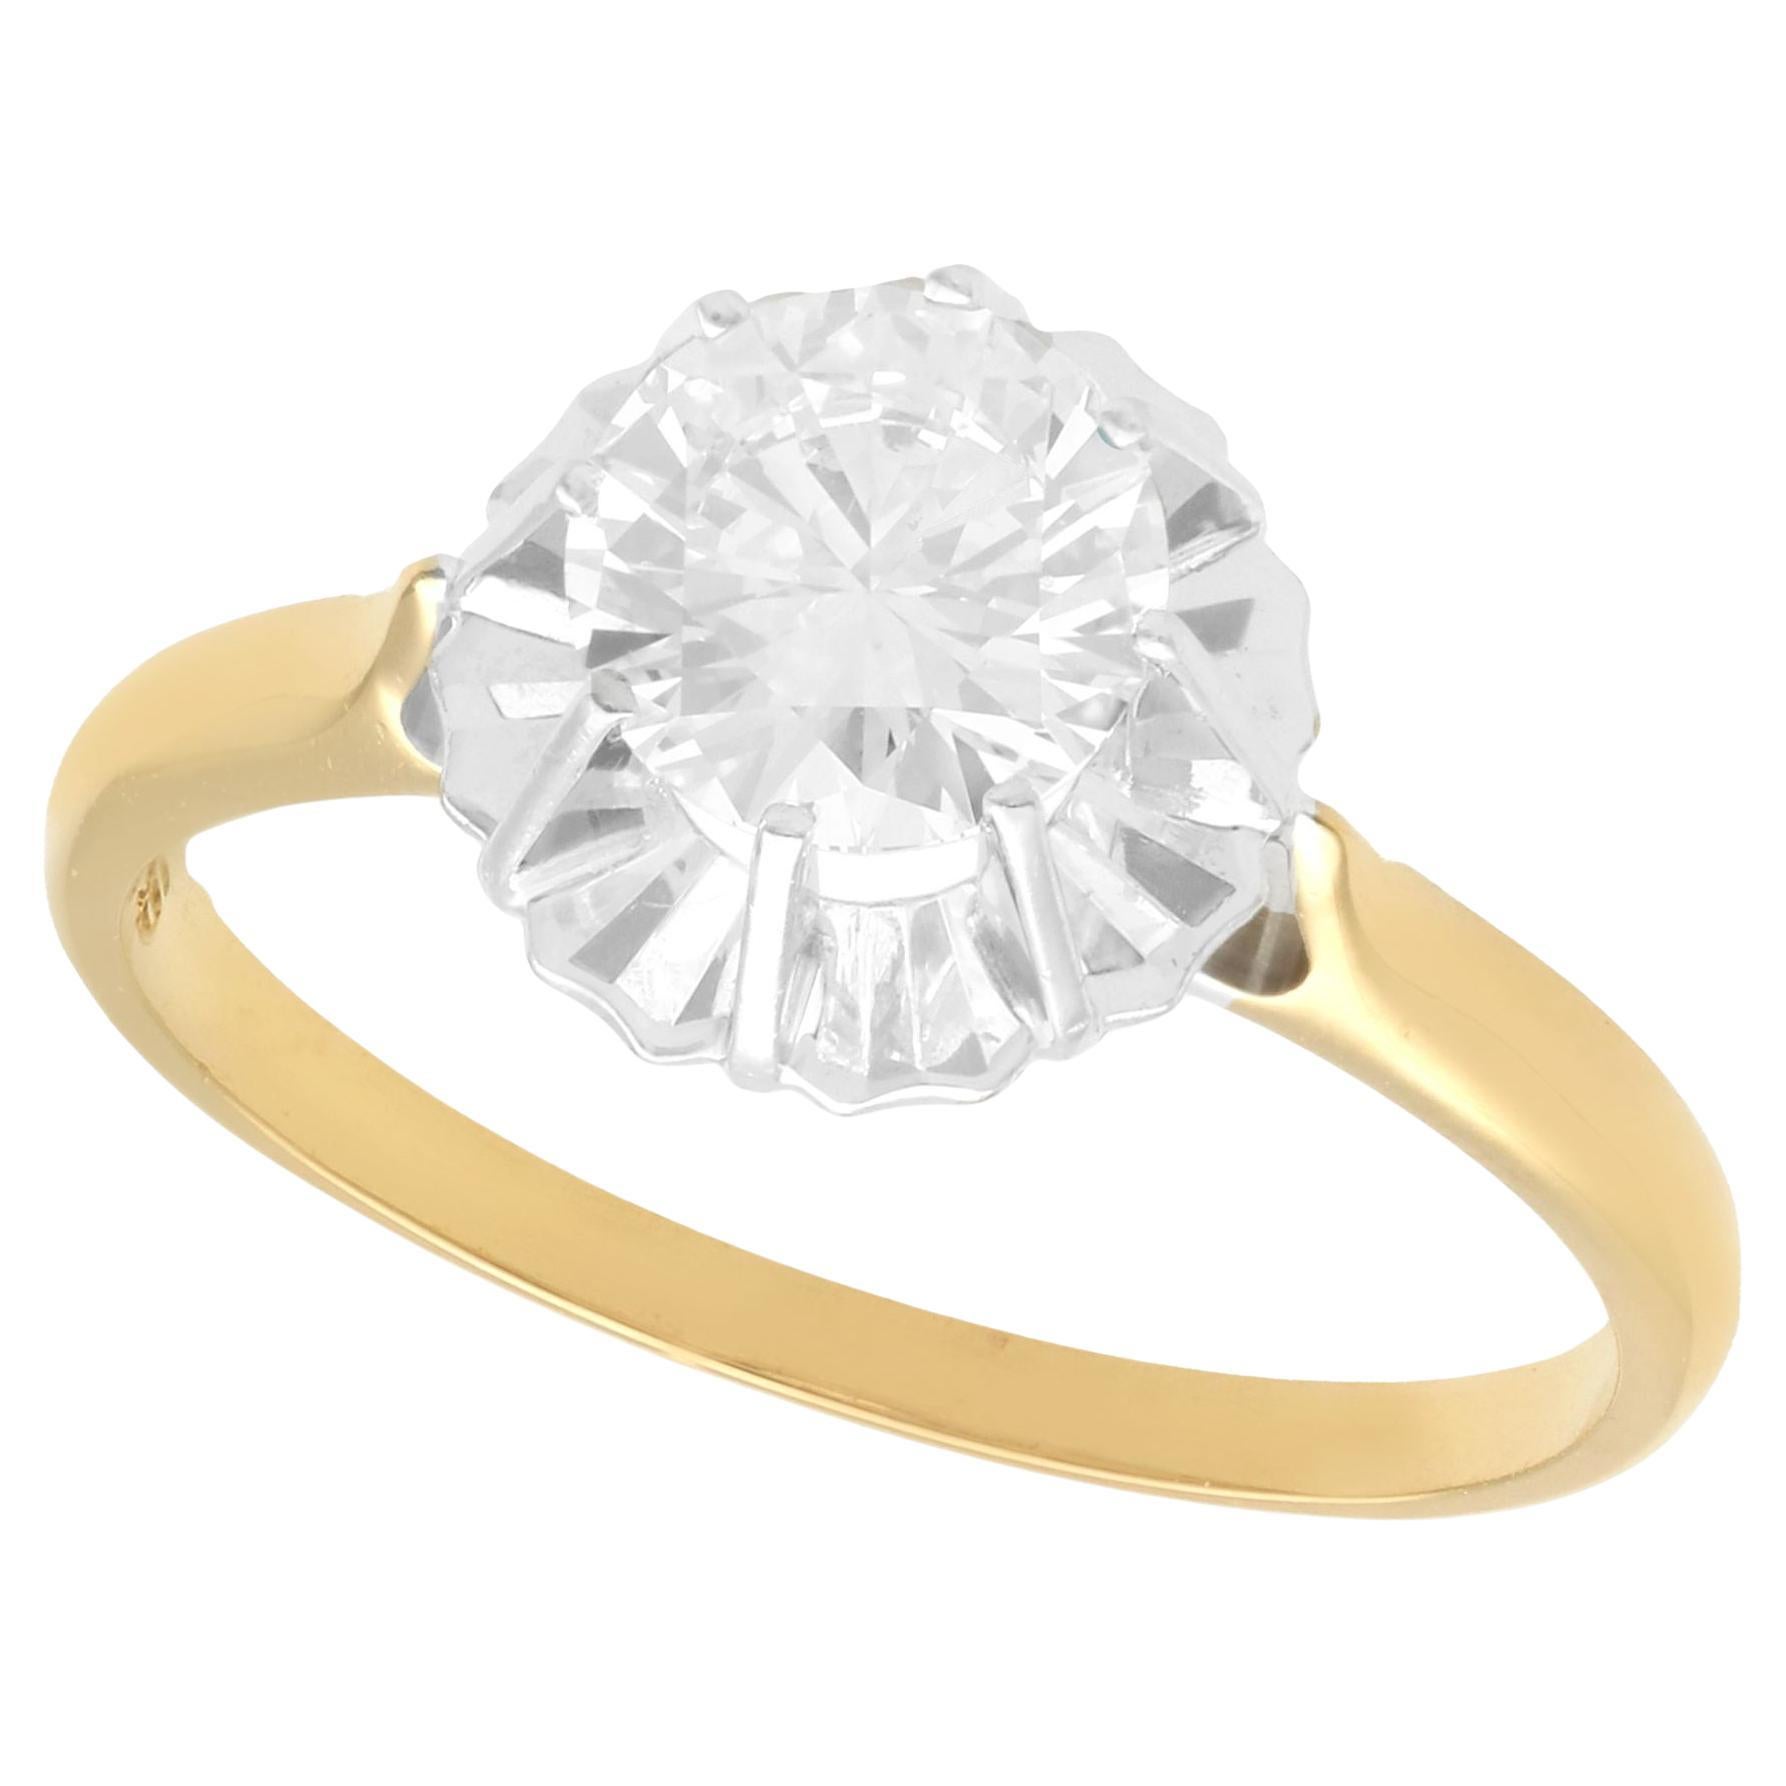 Antique 1.18 Carat Diamond and Yellow Gold Solitaire Ring, circa 1930